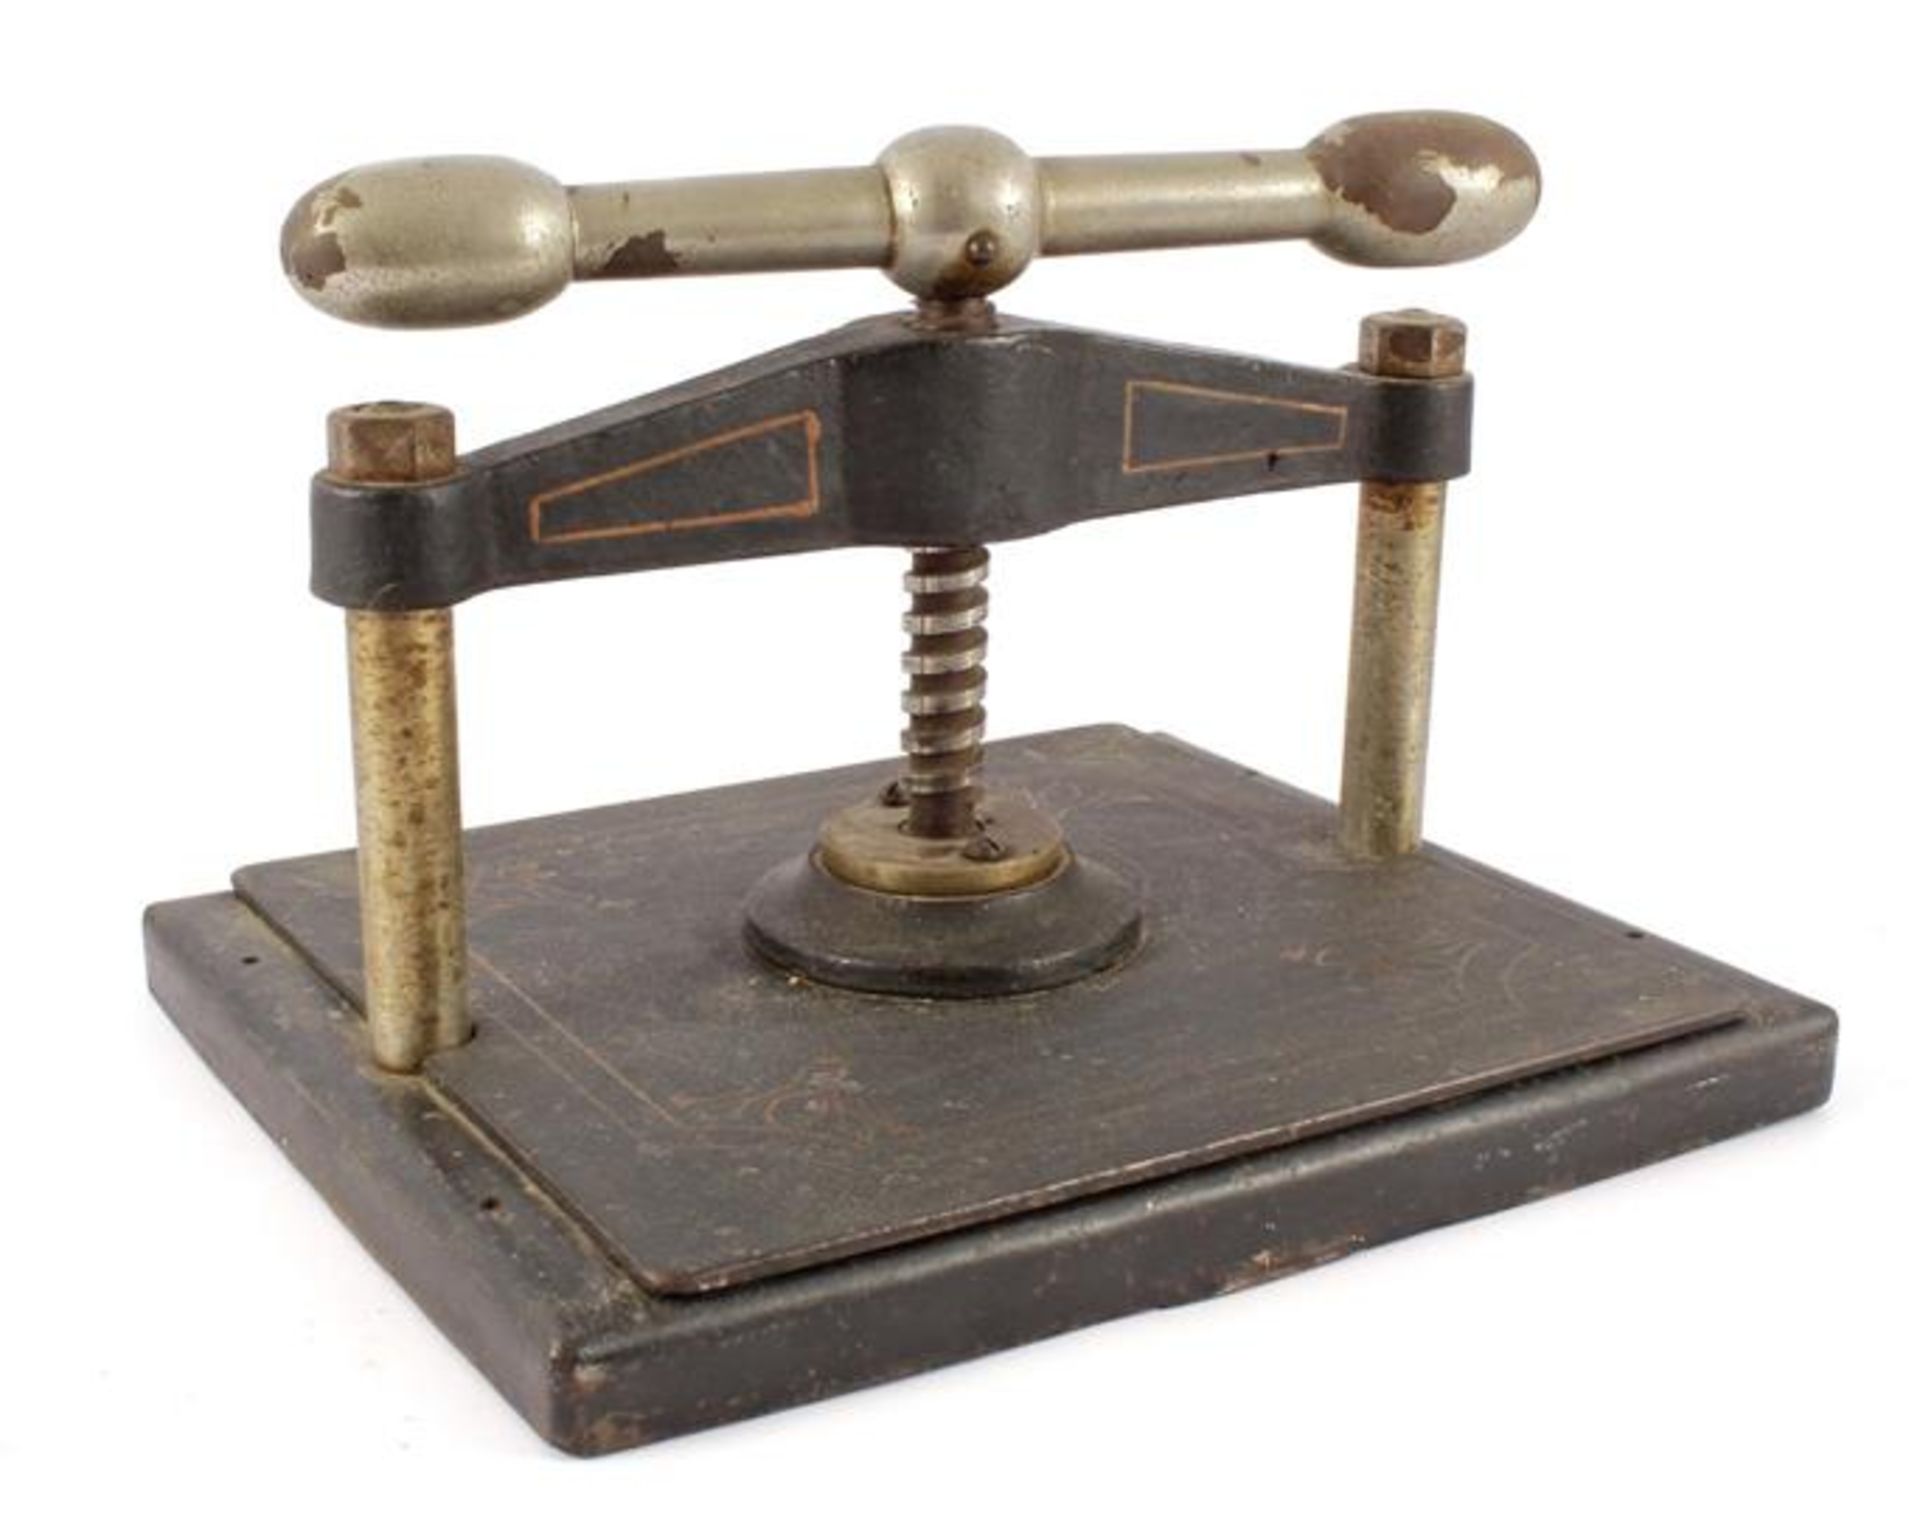 Old iron book press with Jugenstil ornaments, 23 cm high, 34x28.5 cm